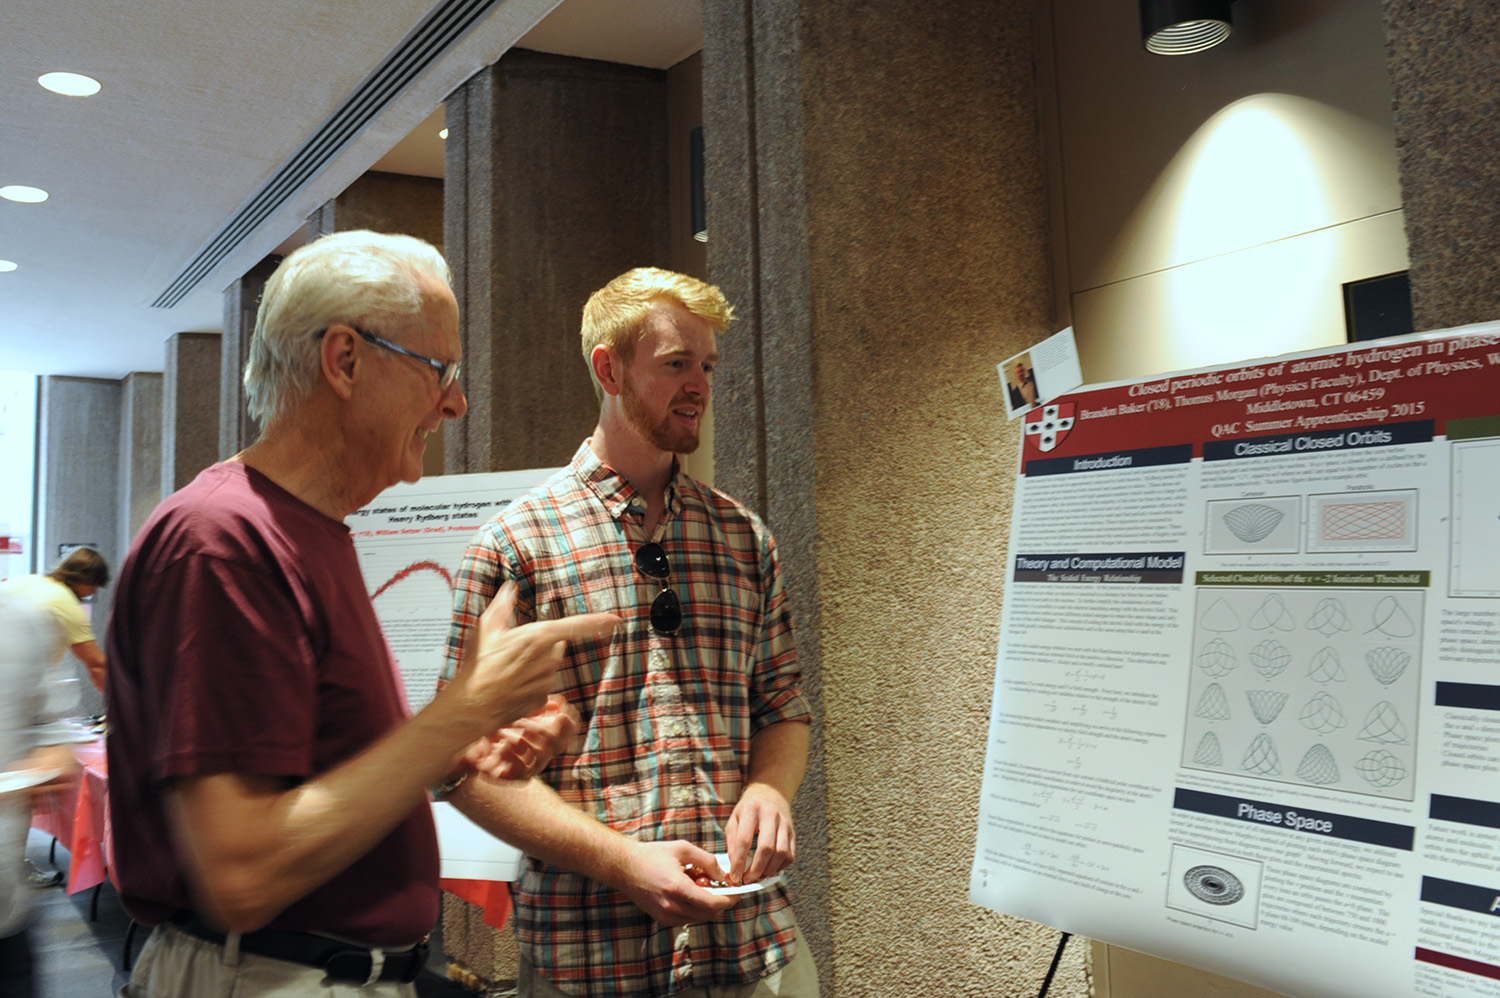 On July 30, the Wesleyan Summer Research Poster Session was held at Exley Science Center. More than 50 undergraduate research fellows presented research at the event. (Photo by Laurie Kenney)